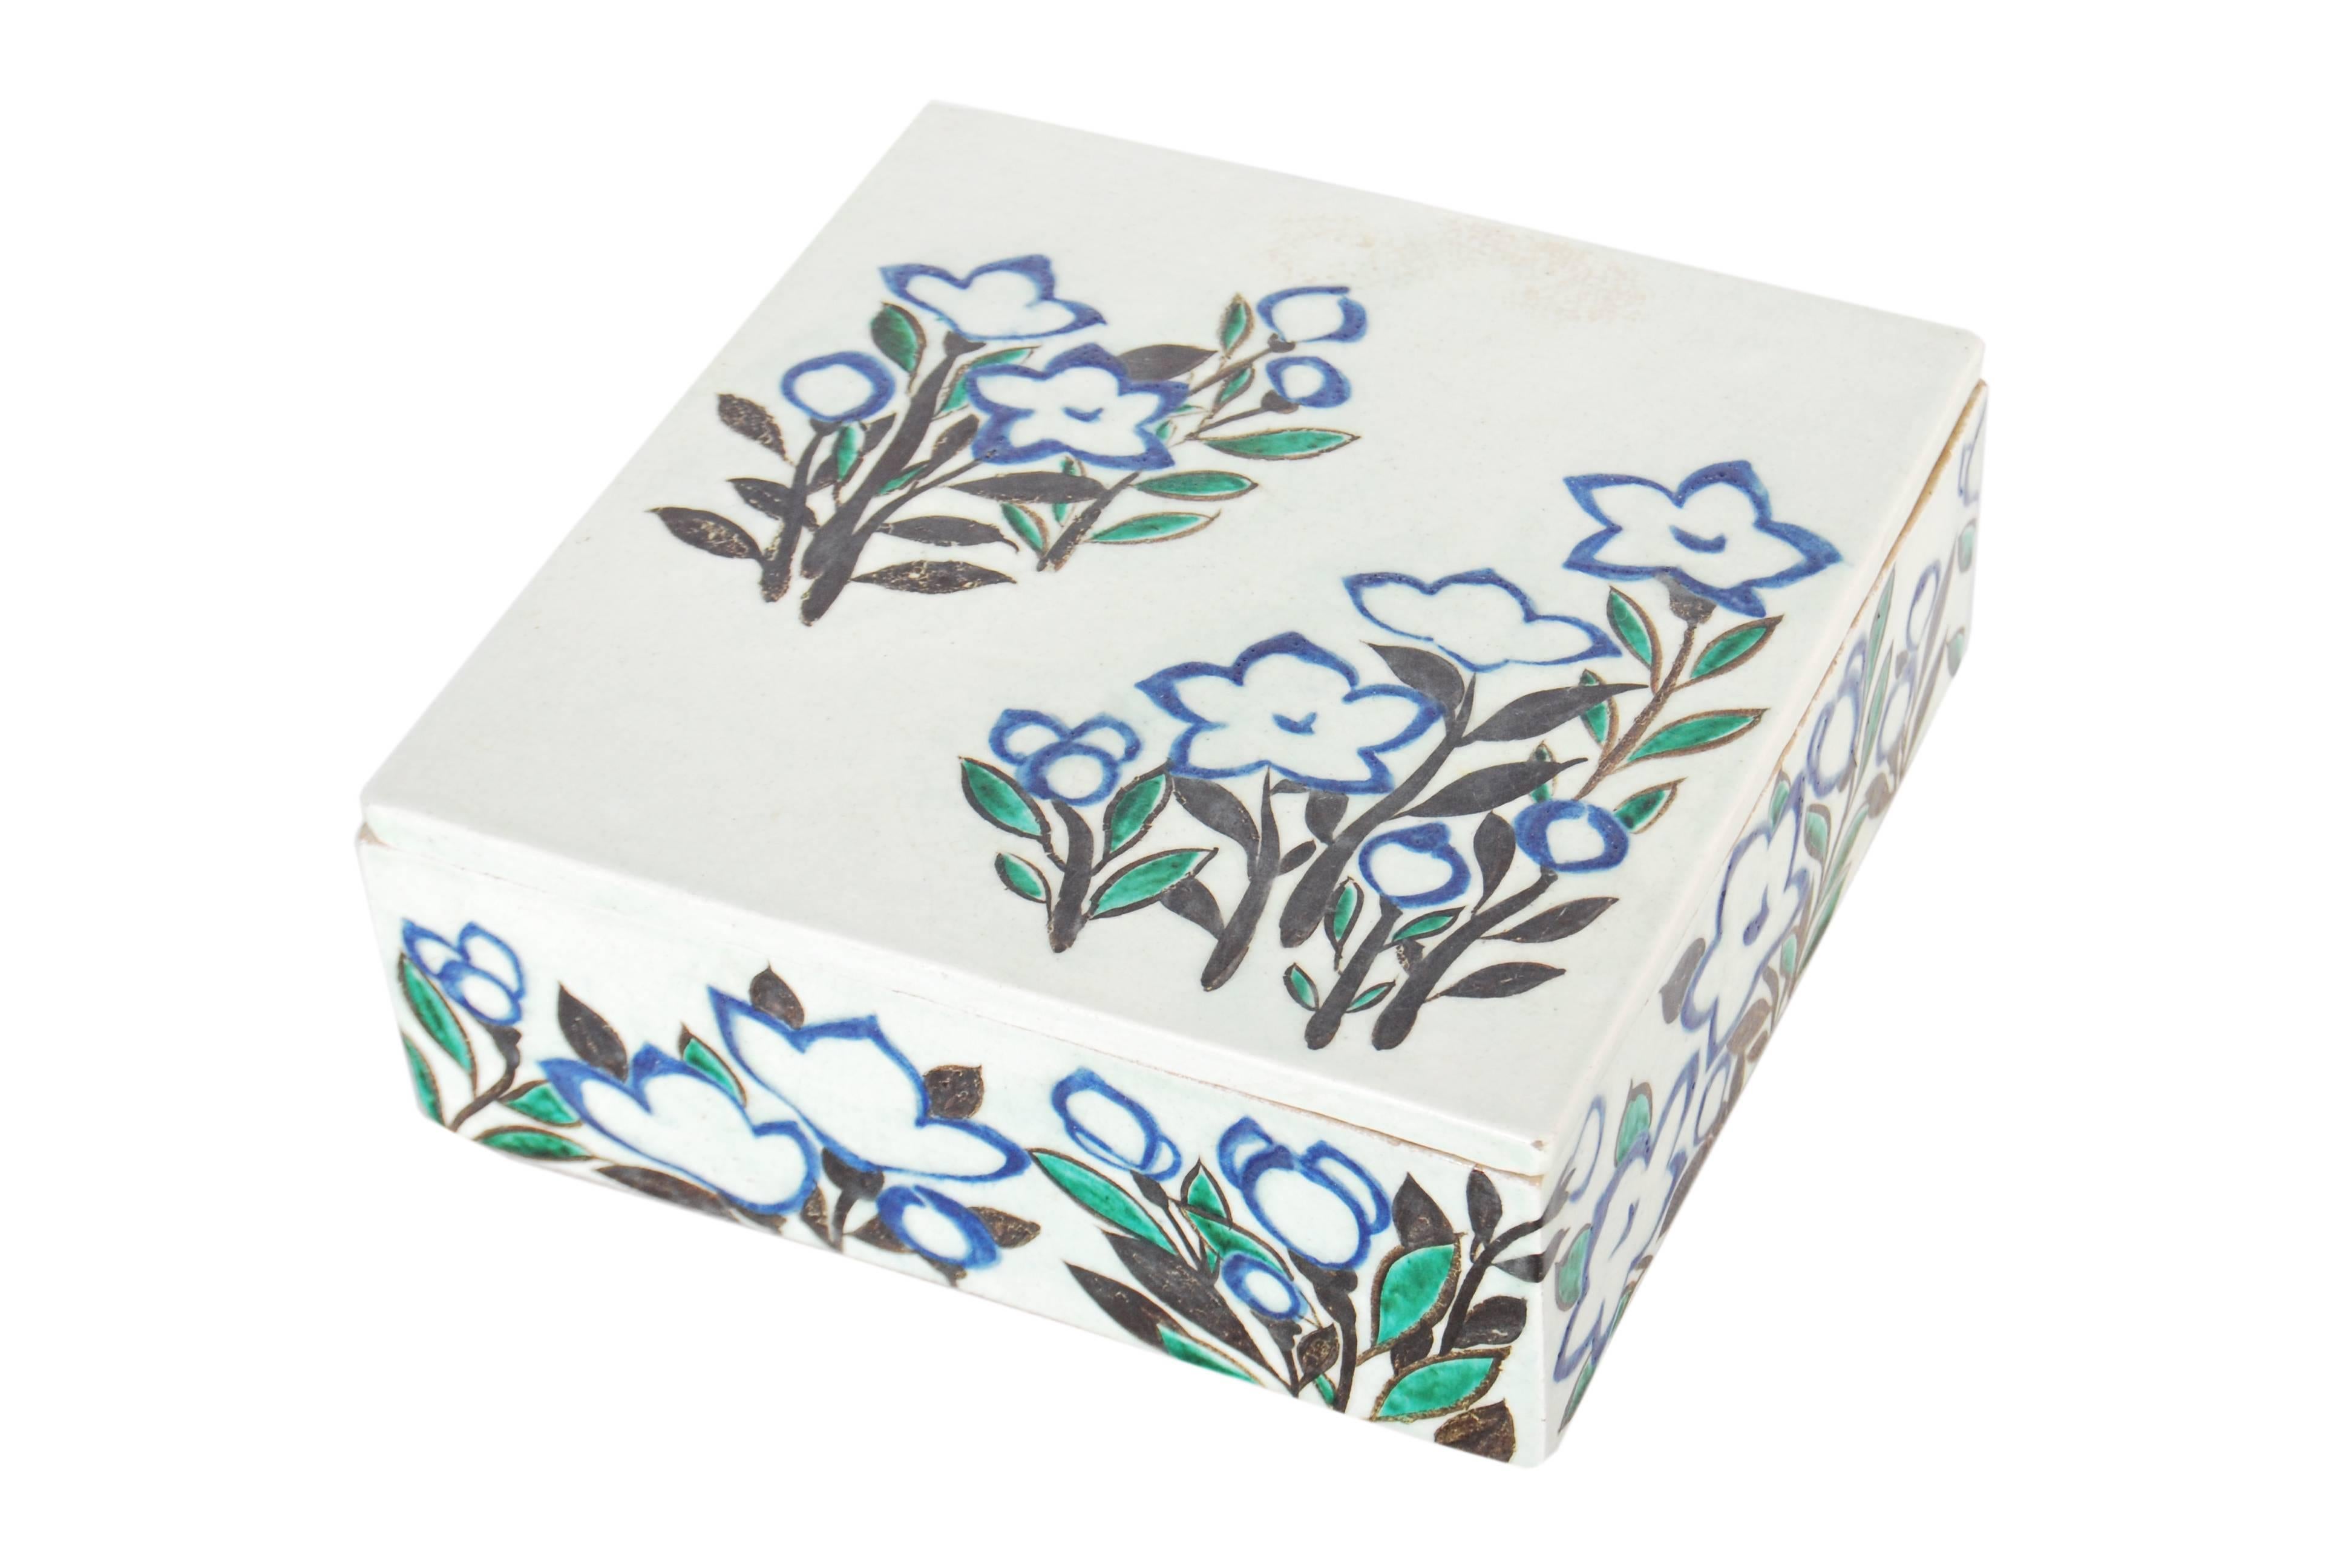 Japanese pottery covered box in the style of Ogata Kenzan, with a freely brushed design of flowers spread across its sides in tones of black, blue and green, Taisho period, circa 1920

Signature to base (not yet translated)

Dimensions: H 7.5cm x W